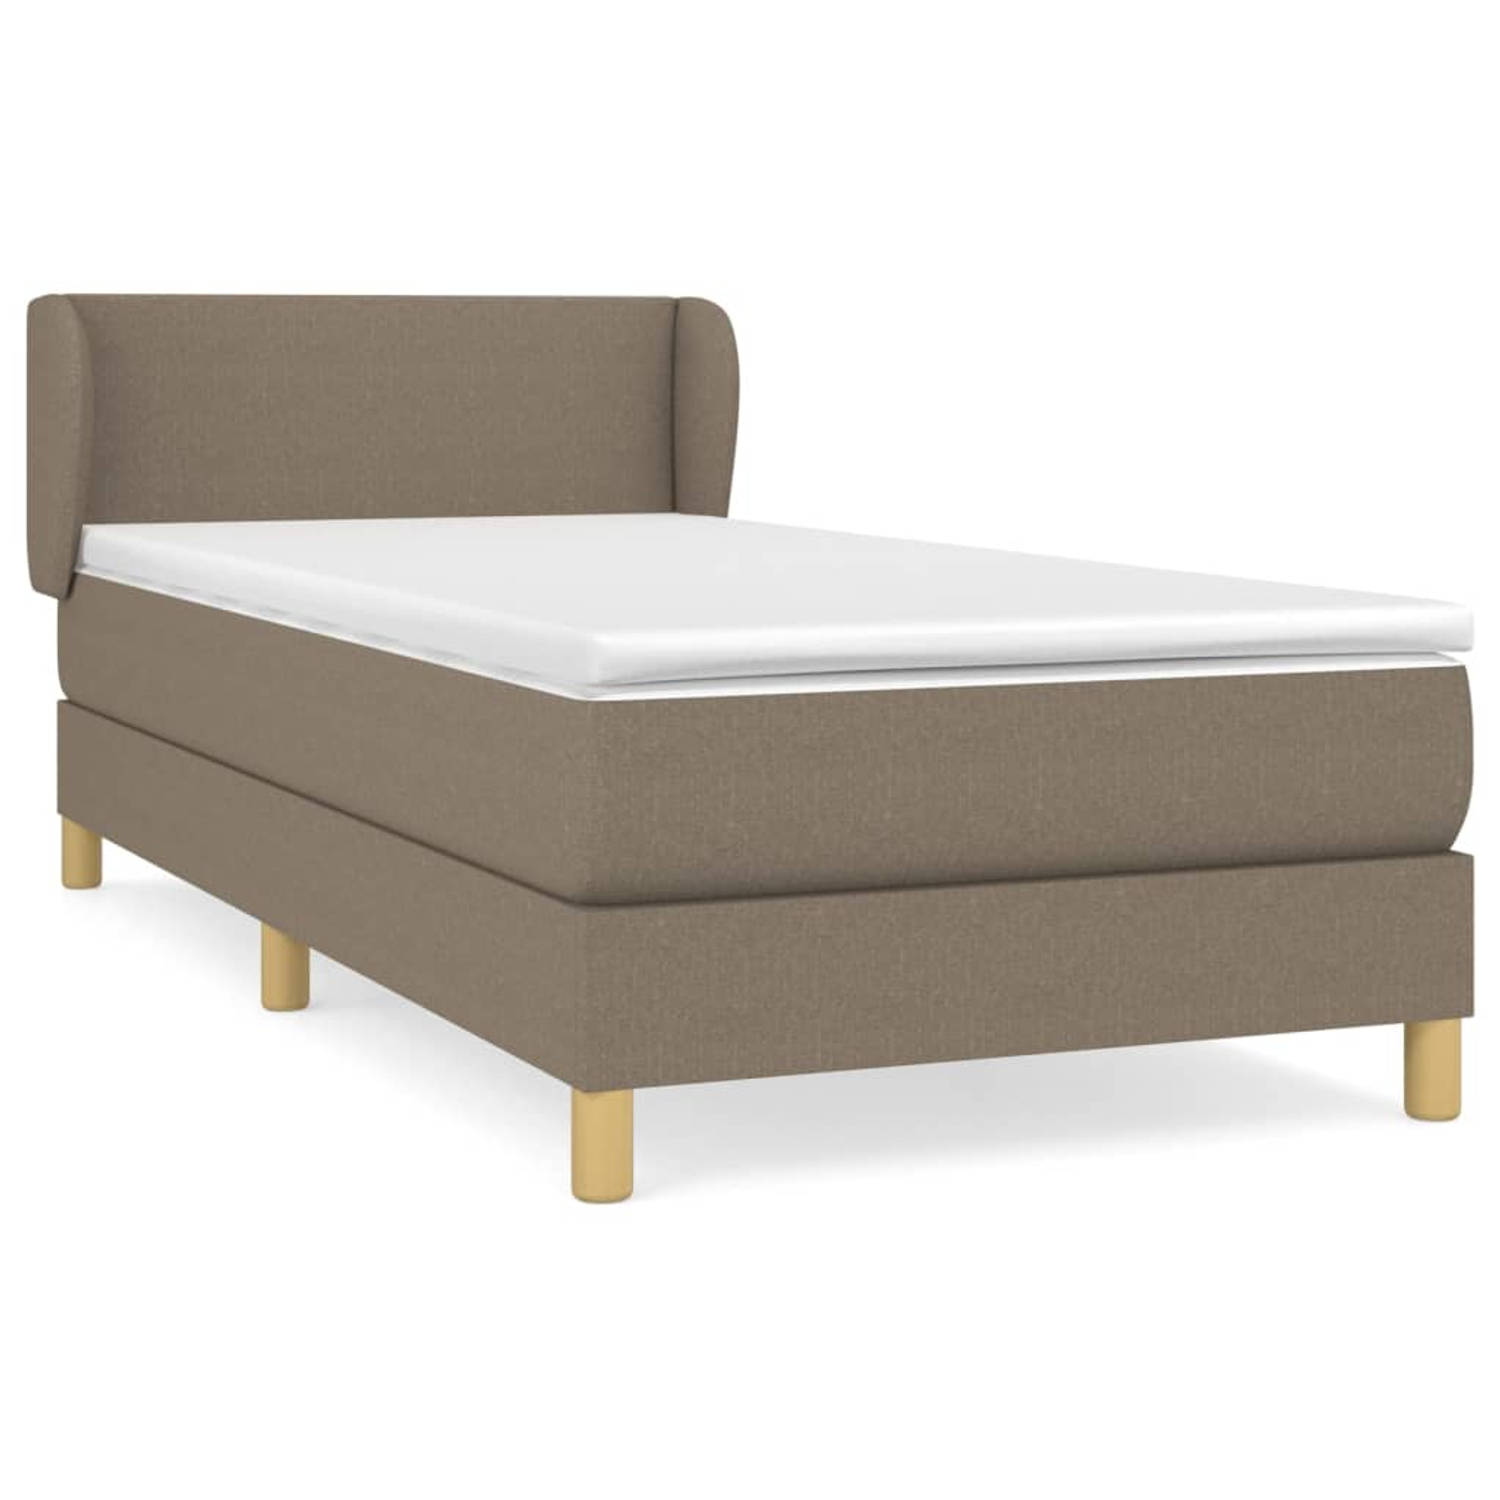 The Living Store Boxspringbed - Comfort - Bed - 203x83x78/88 cm - Taupe